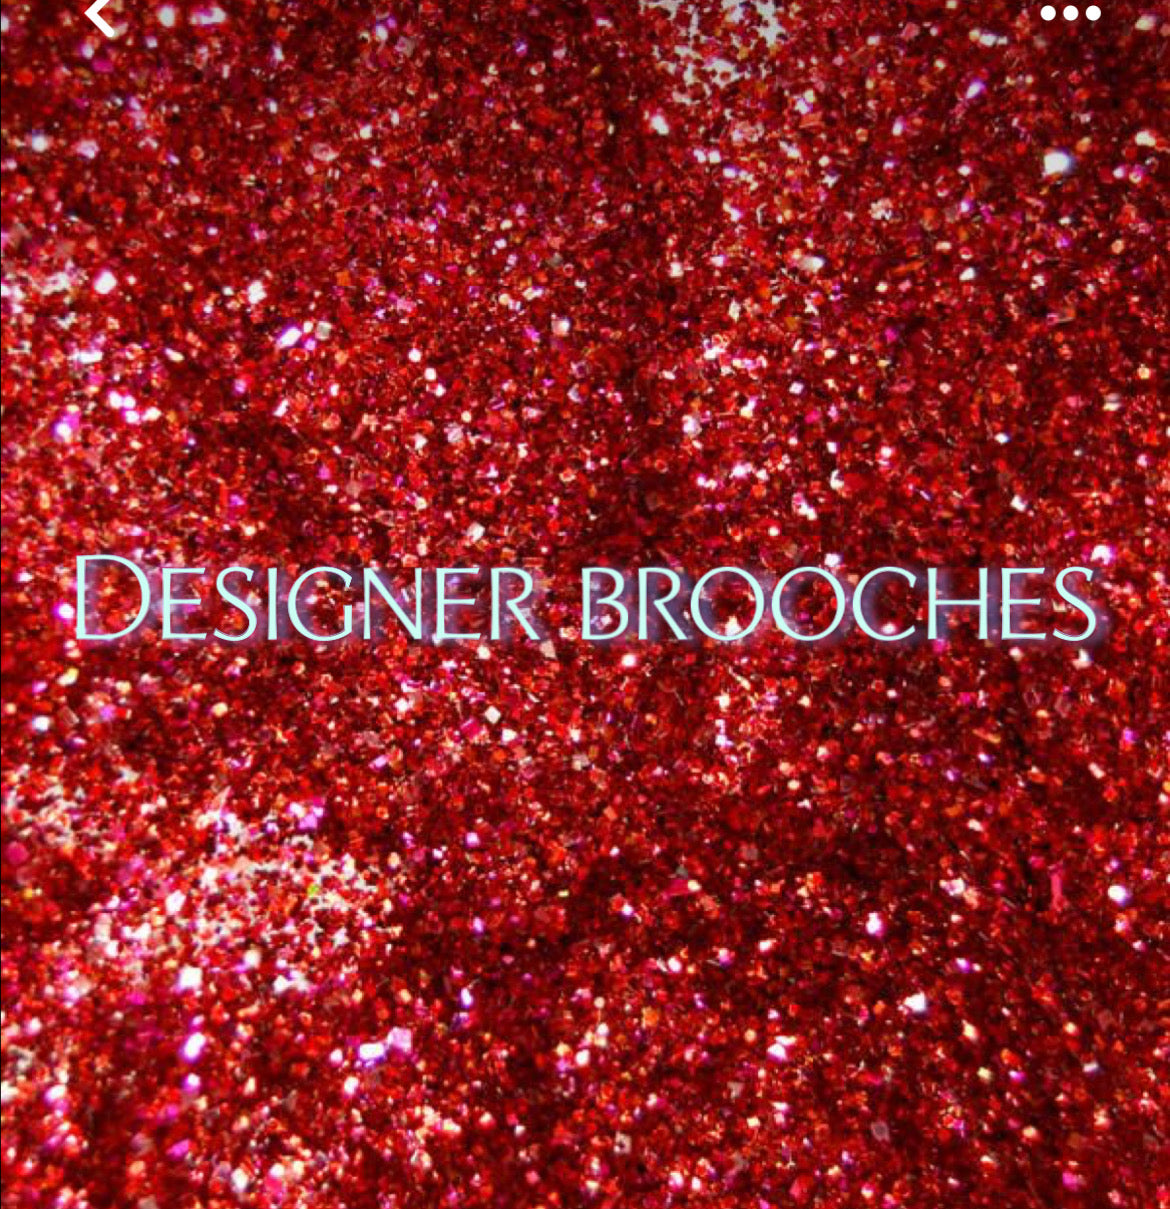 Brooches in designer styles